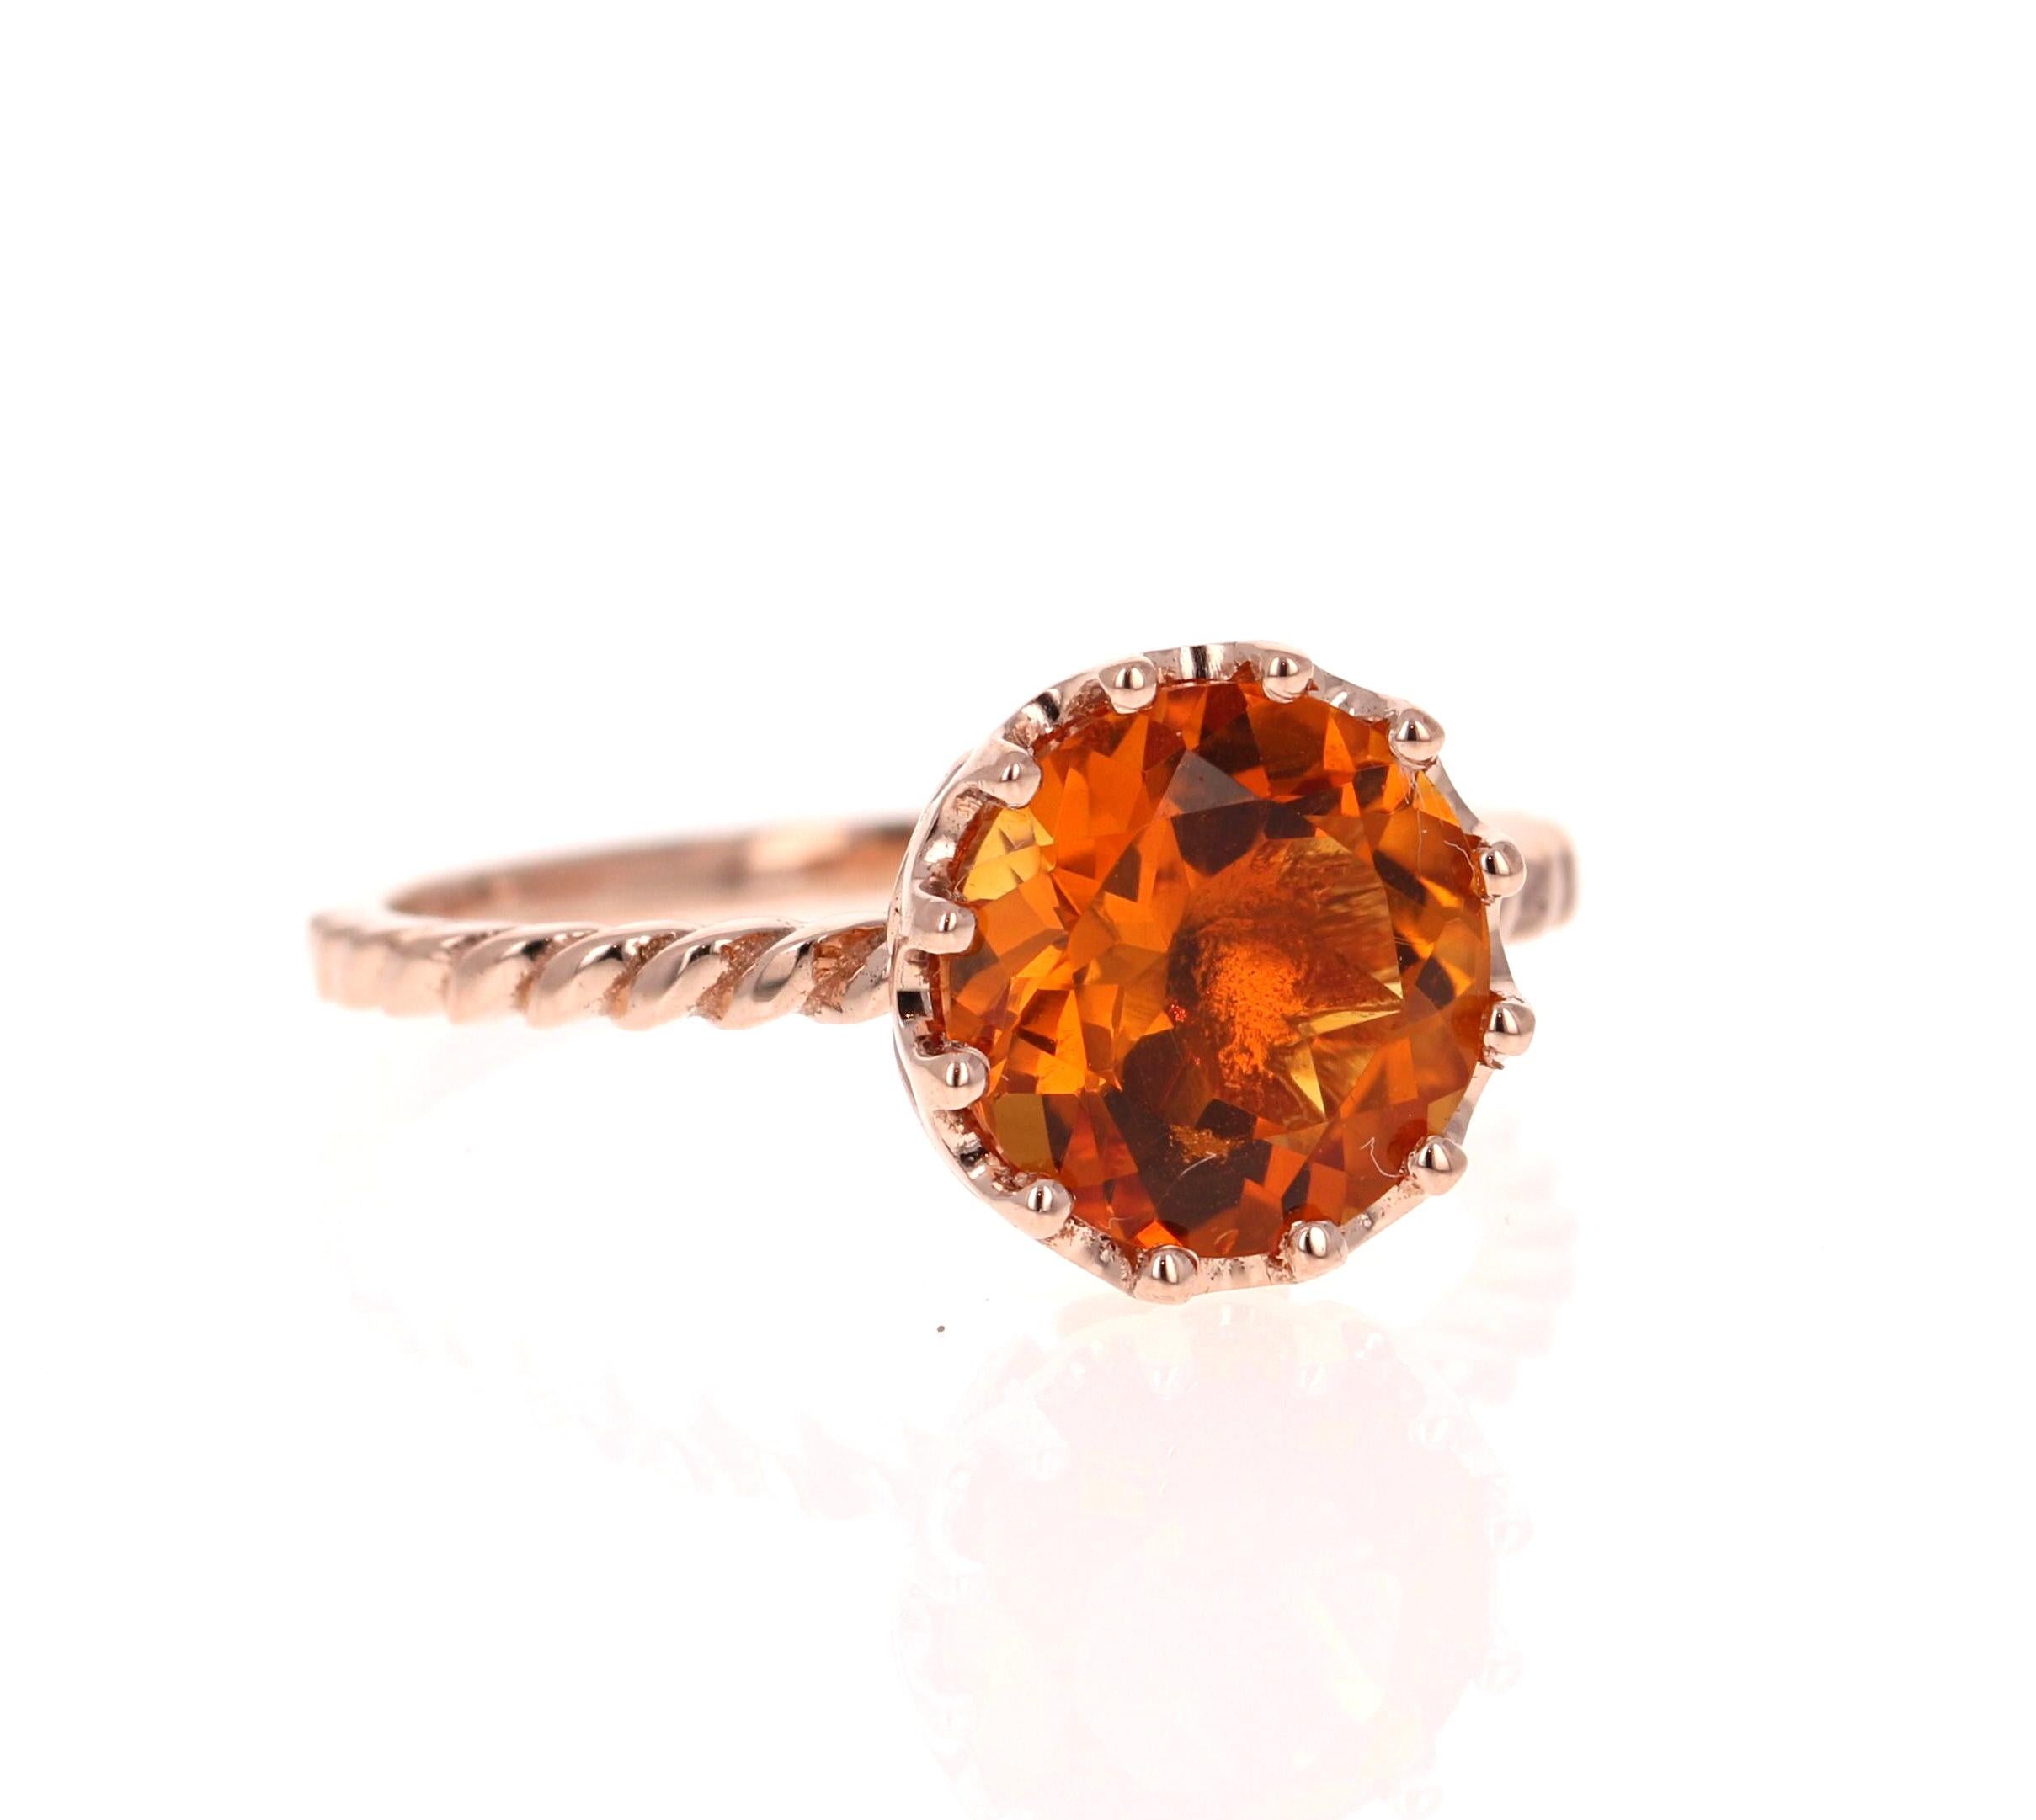 This beautiful and simple ring has a bright and vivid Round Cut Citrine Quartz in the center that weighs 2.15 Carats. 
It is set in a beautifully crafted wire style 14 Karat Rose Gold setting and weighs approximately 2.3 Grams.  Very light weight